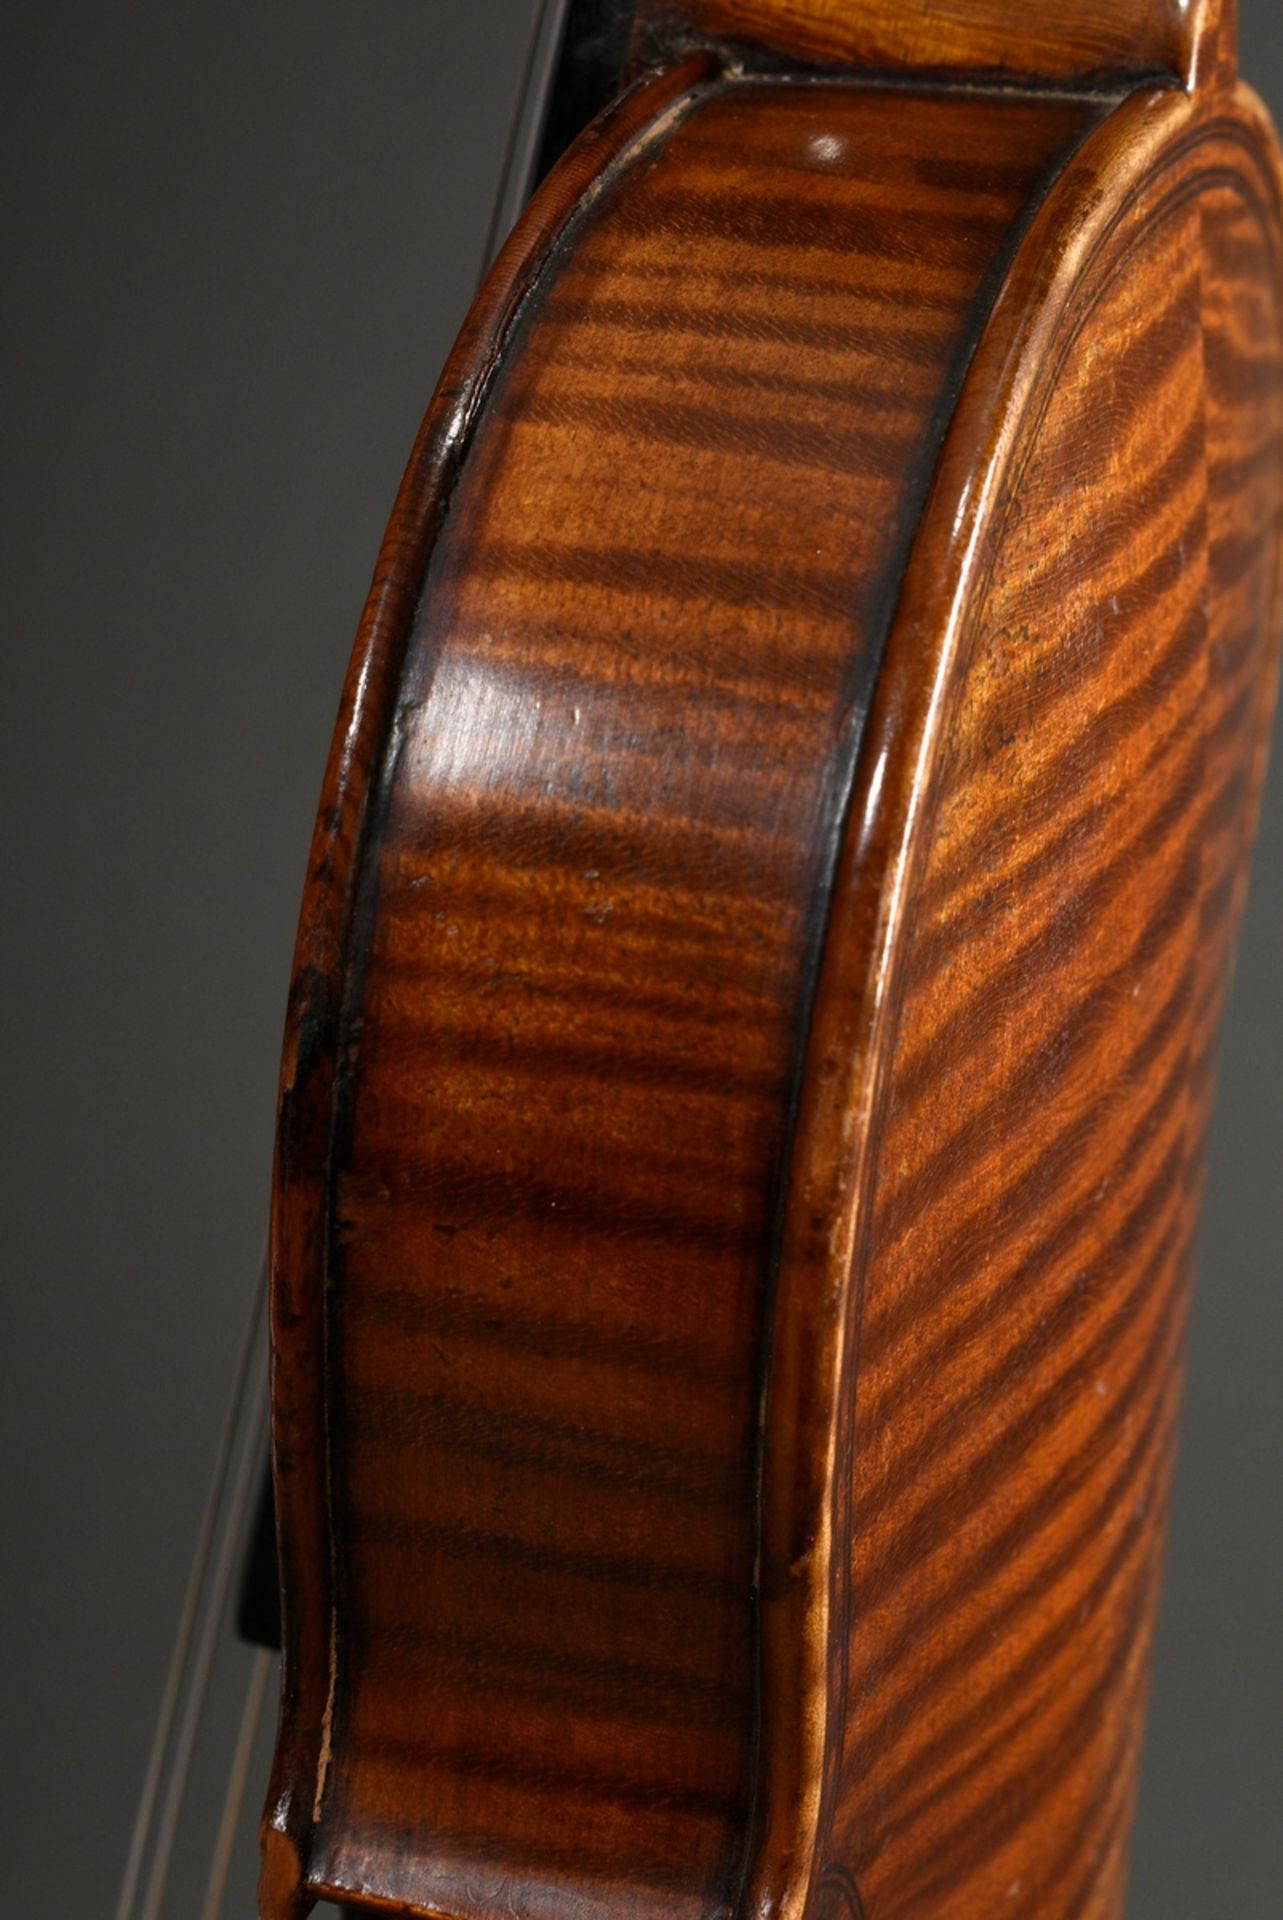 Elegant violin after Maggini, German 19th c., fine-grained spruce top, two-piece beautifully flamed - Image 8 of 16